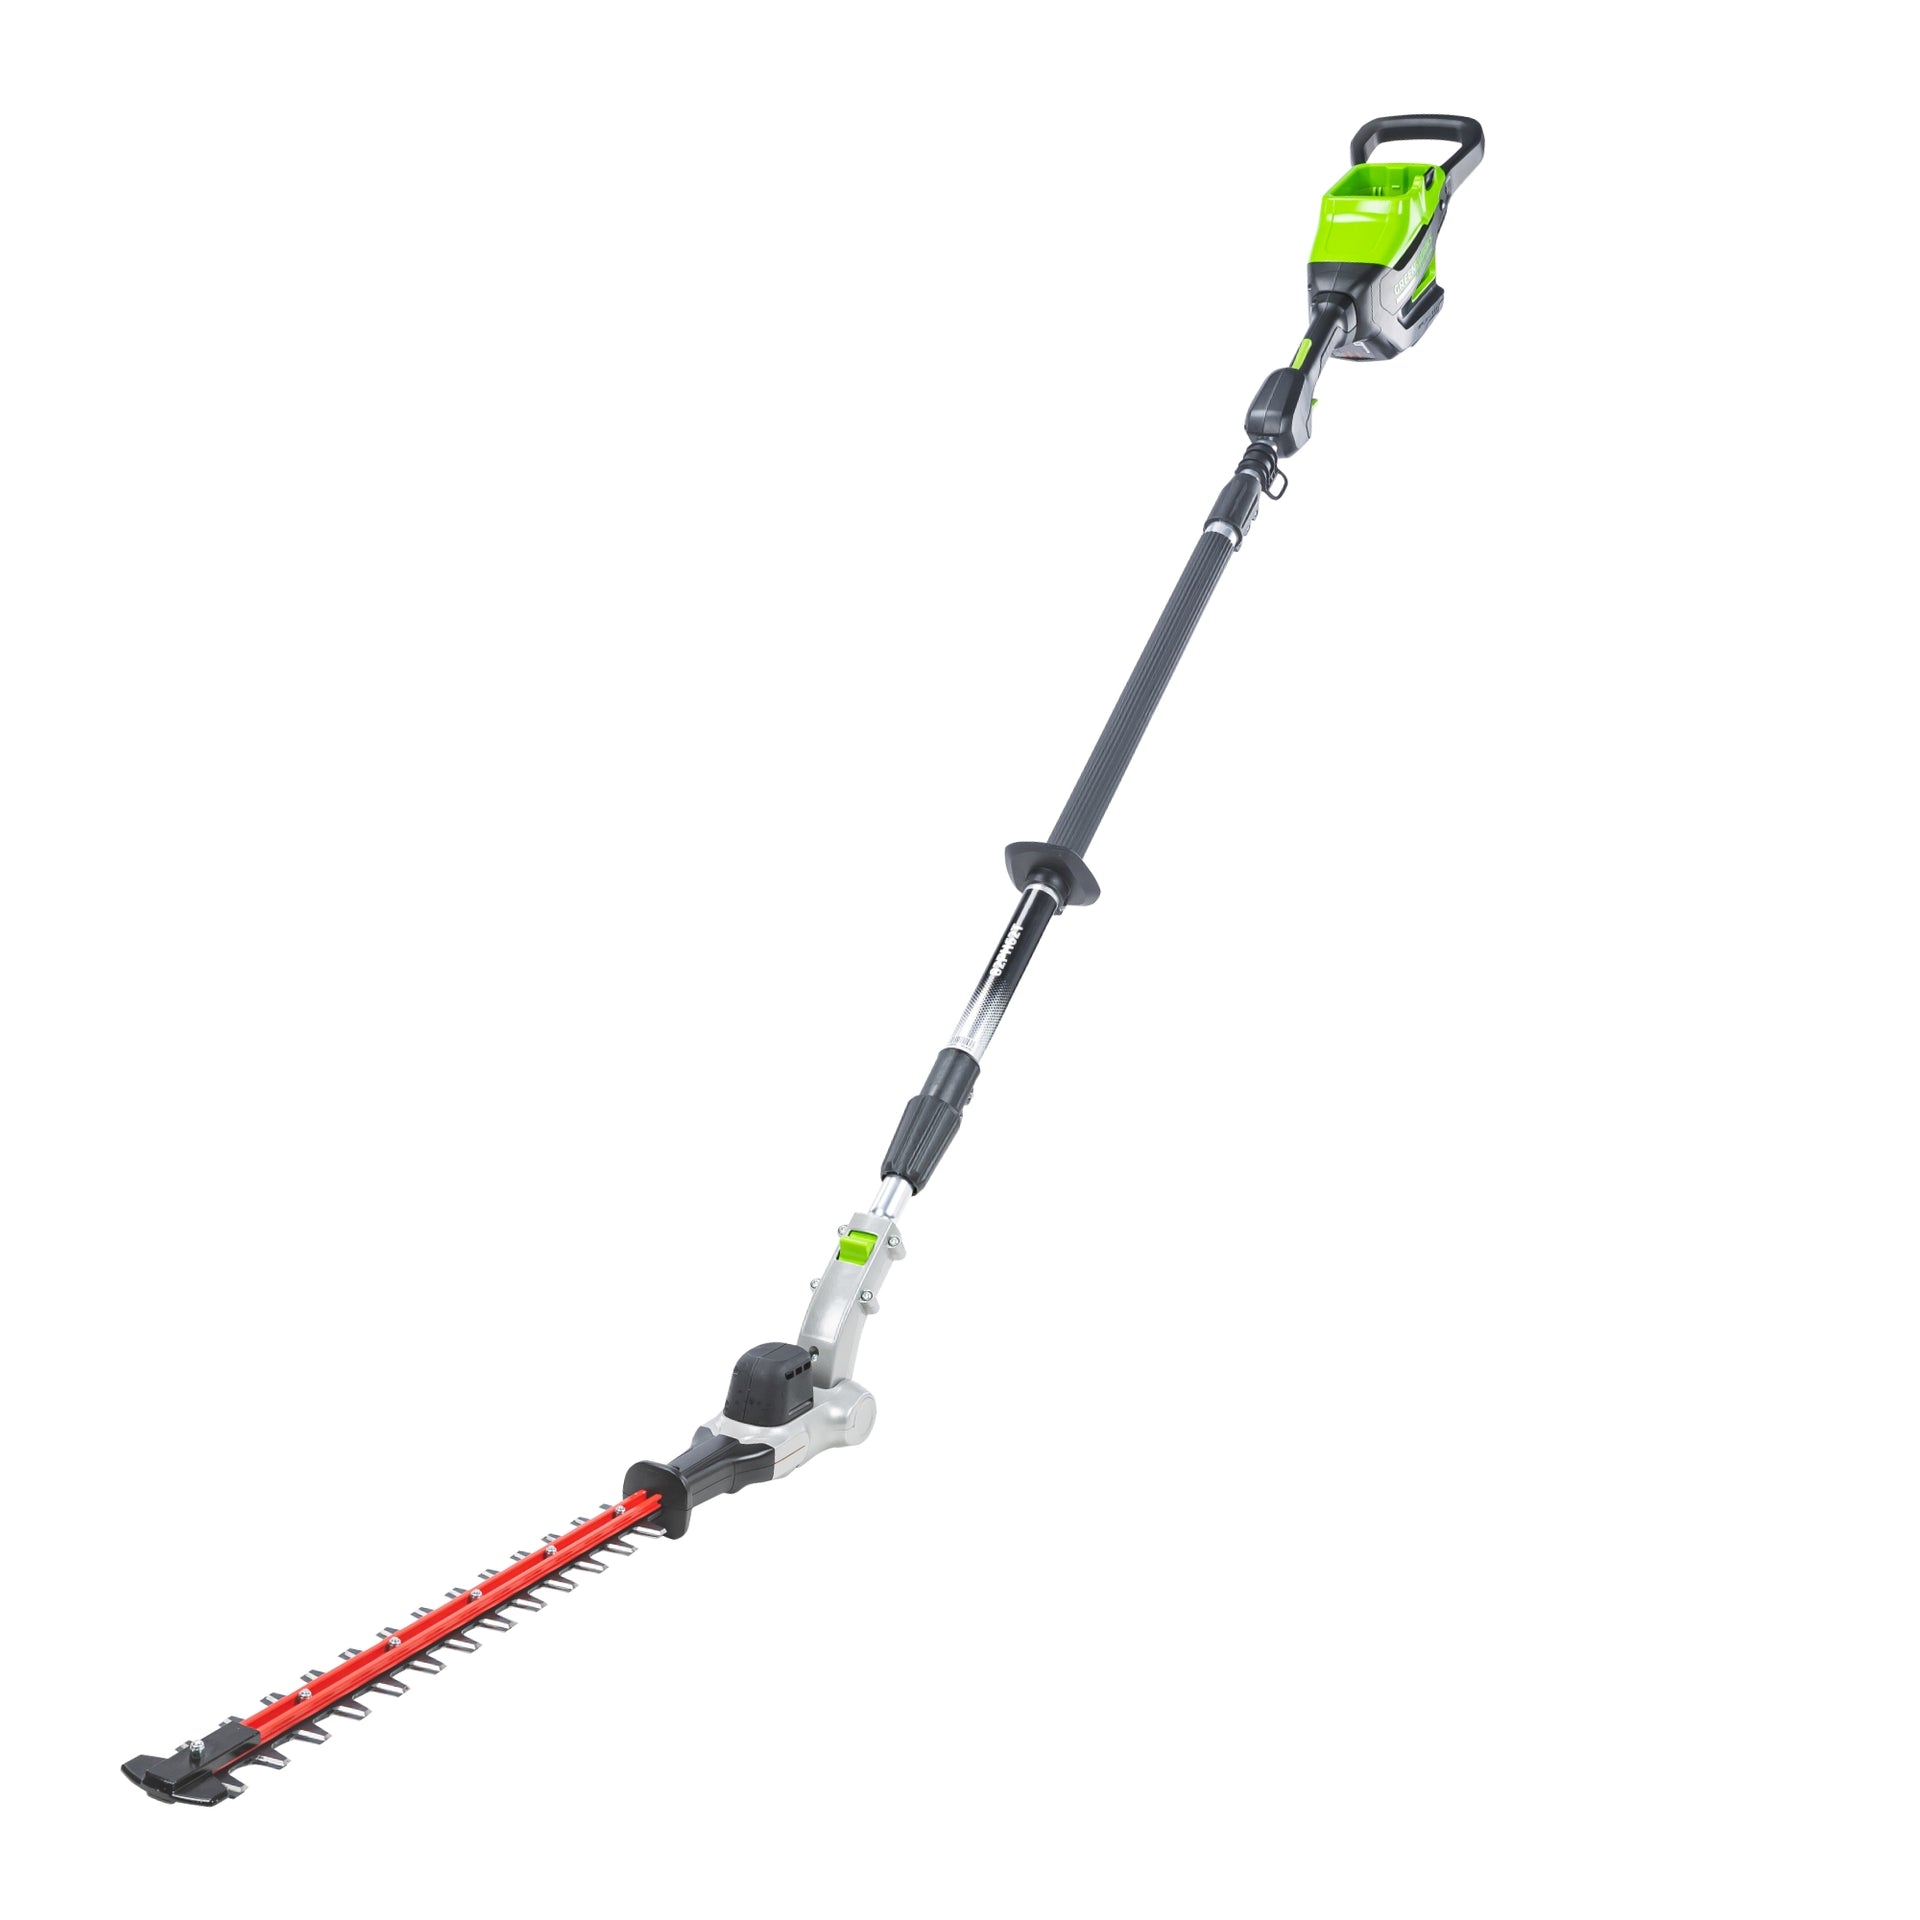 82V Short Pole Hedge Trimmer with 2.5 Ah Battery and Dual Port Charger, 2306902